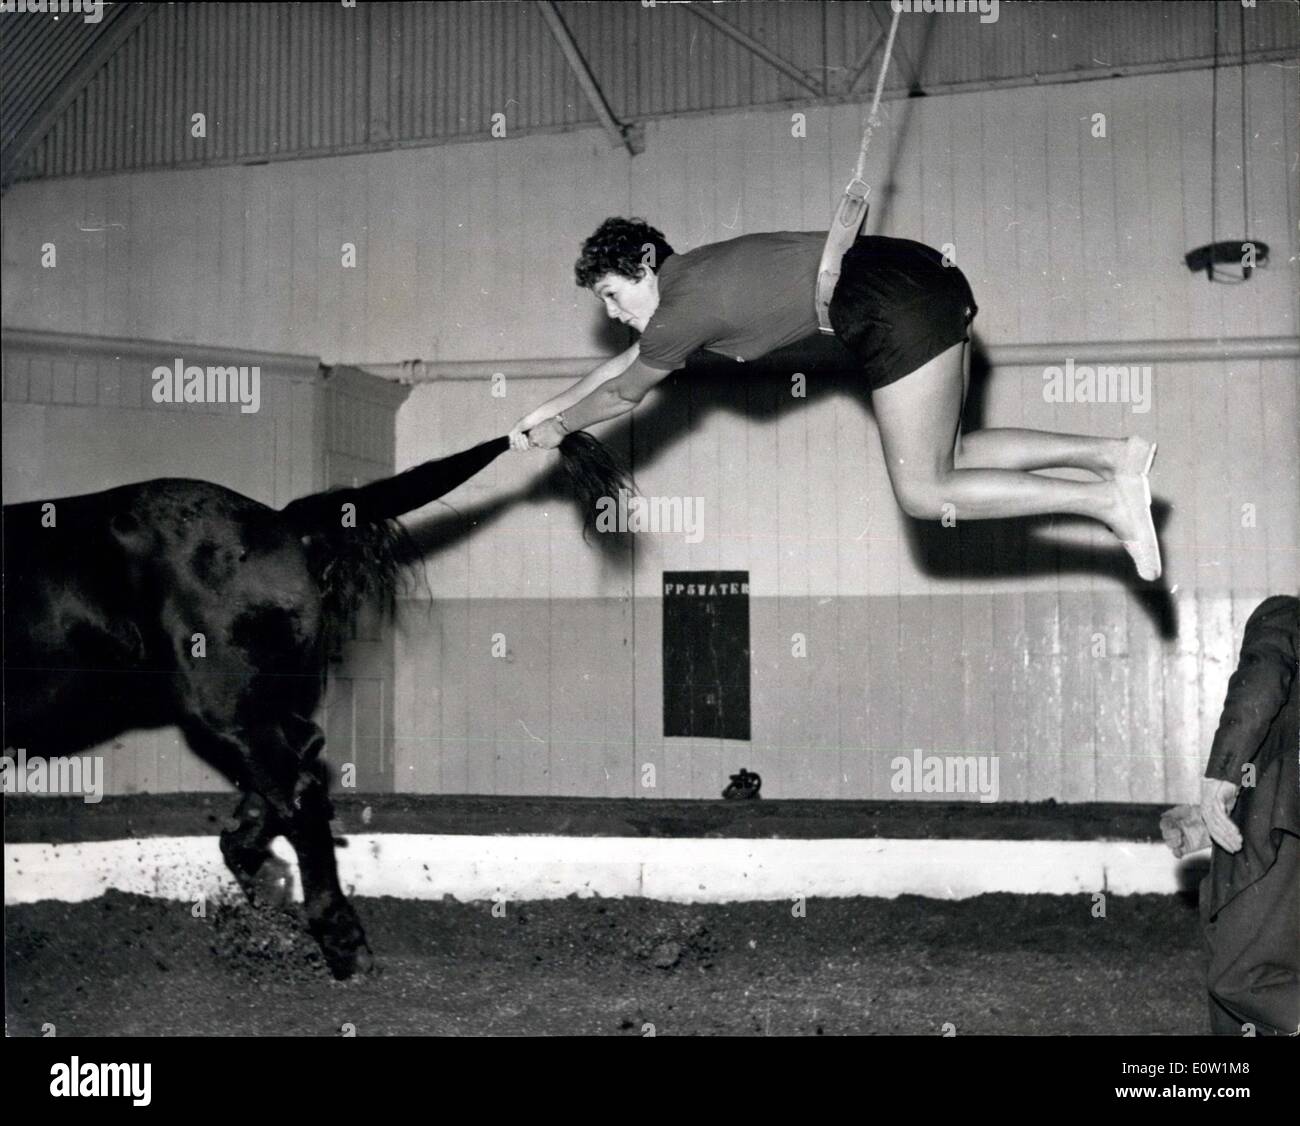 Nov. 24, 1960 - Preparing for the Royal Circus Performance Natalie Steward practises bareback riding: Natalie Steward, the swimmer with two Olympic medals, yesterday made her first attempt at bareback horse riding at Ascot. When Bertram Mills Circus was rehearsing for its Royal Performance on Dec.21 at Olympia in aid of the Imperial Cancer Research Fund. Natalie hopes to be a skilled rider in time for the performance in which she will take part Stock Photo